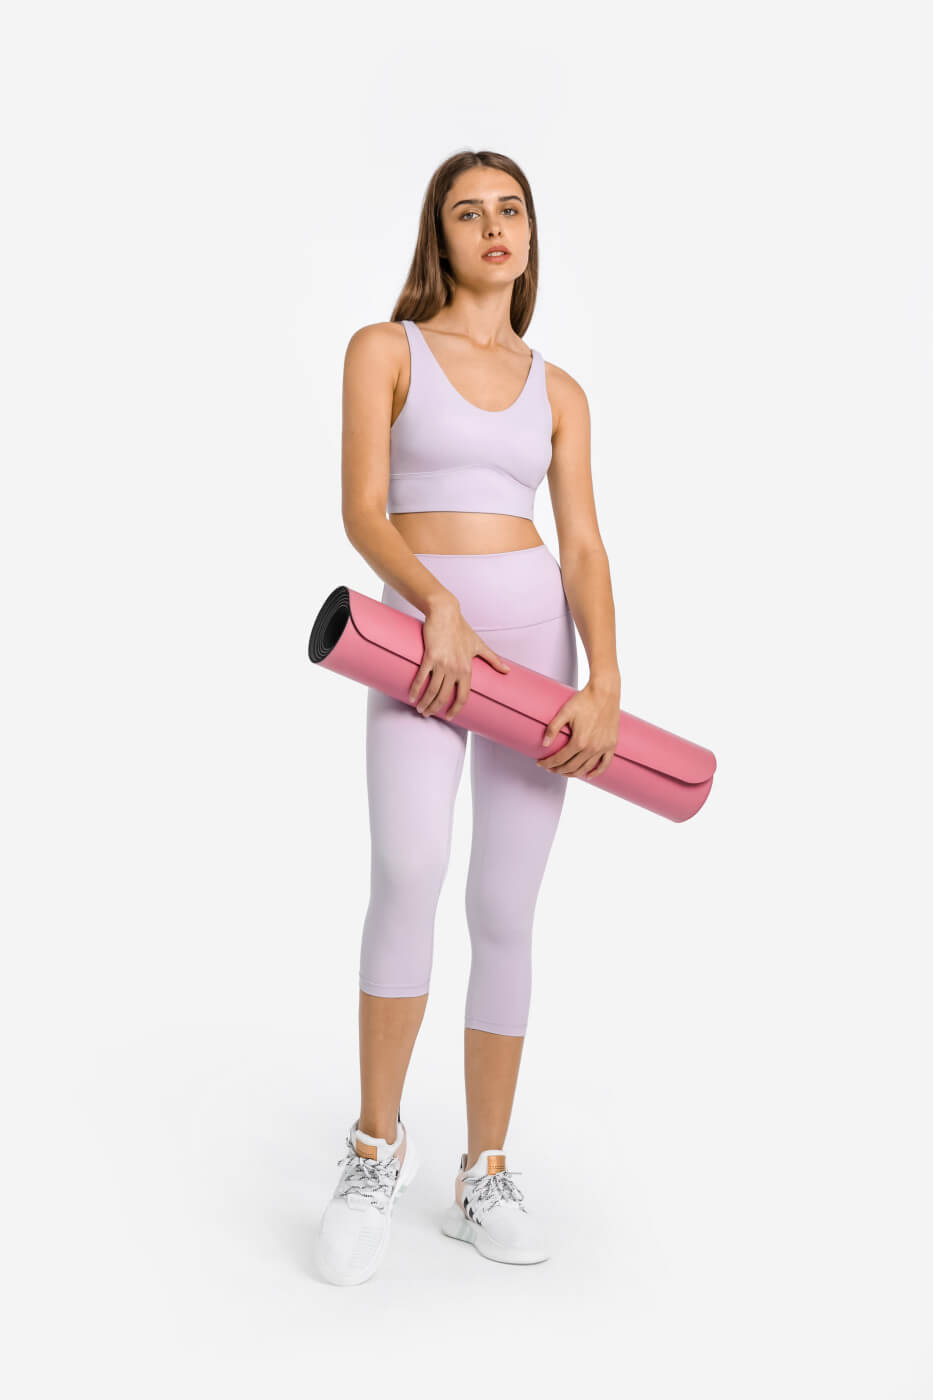 What Are The Best Shock Absorber Bras? – Gymwearmovement